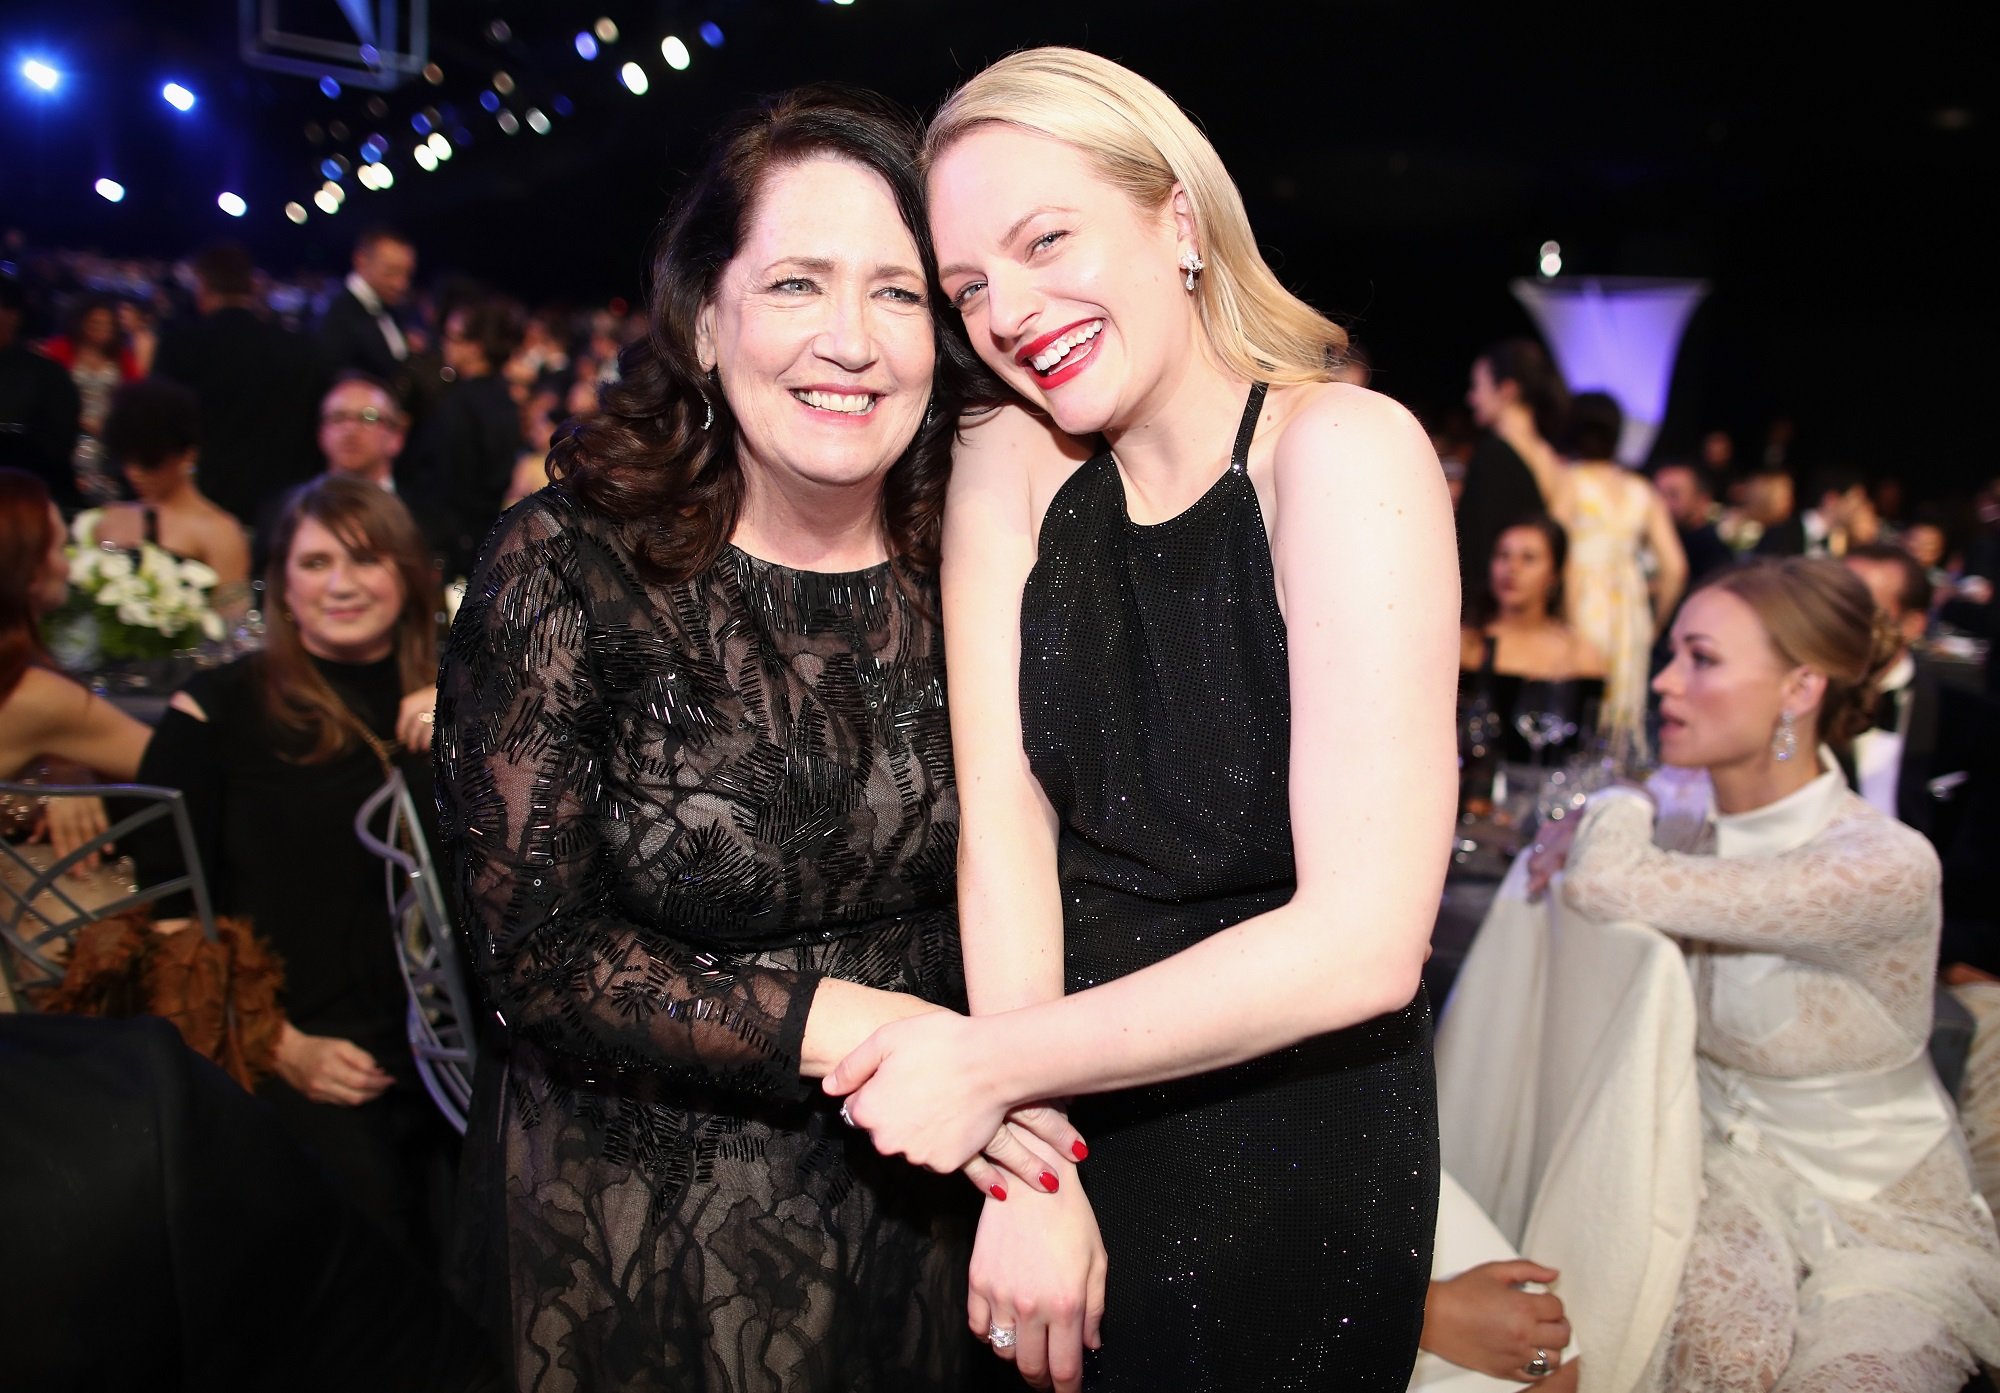 Ann Dowd and Elisabeth Moss hug at the 24th Annual Screen Actors Guild Awards in 2018